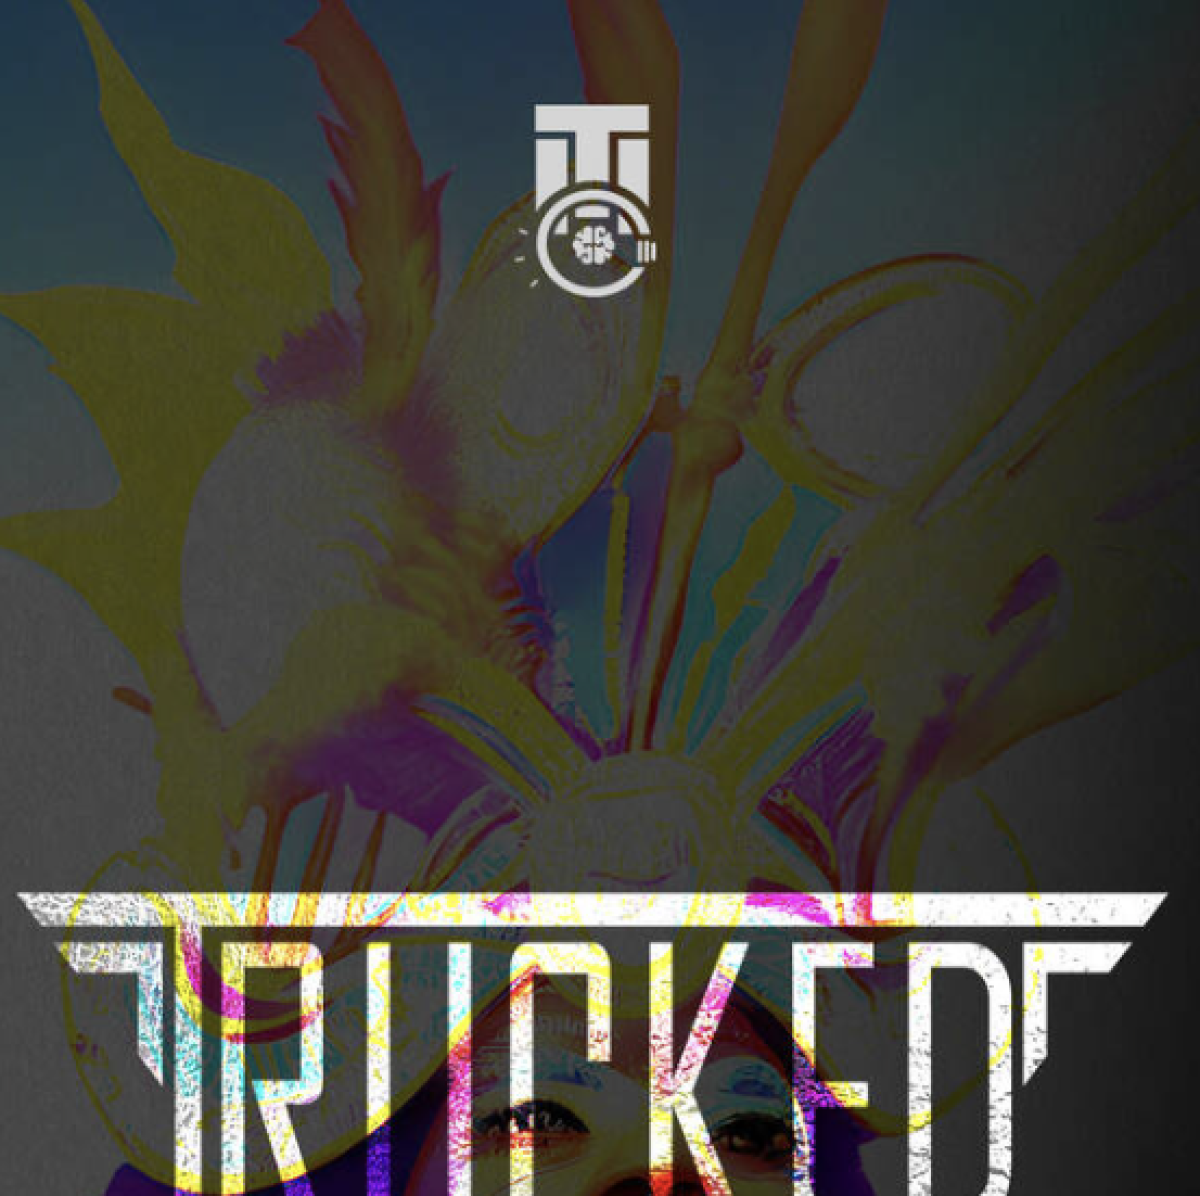 Trucked flyer or graphic.